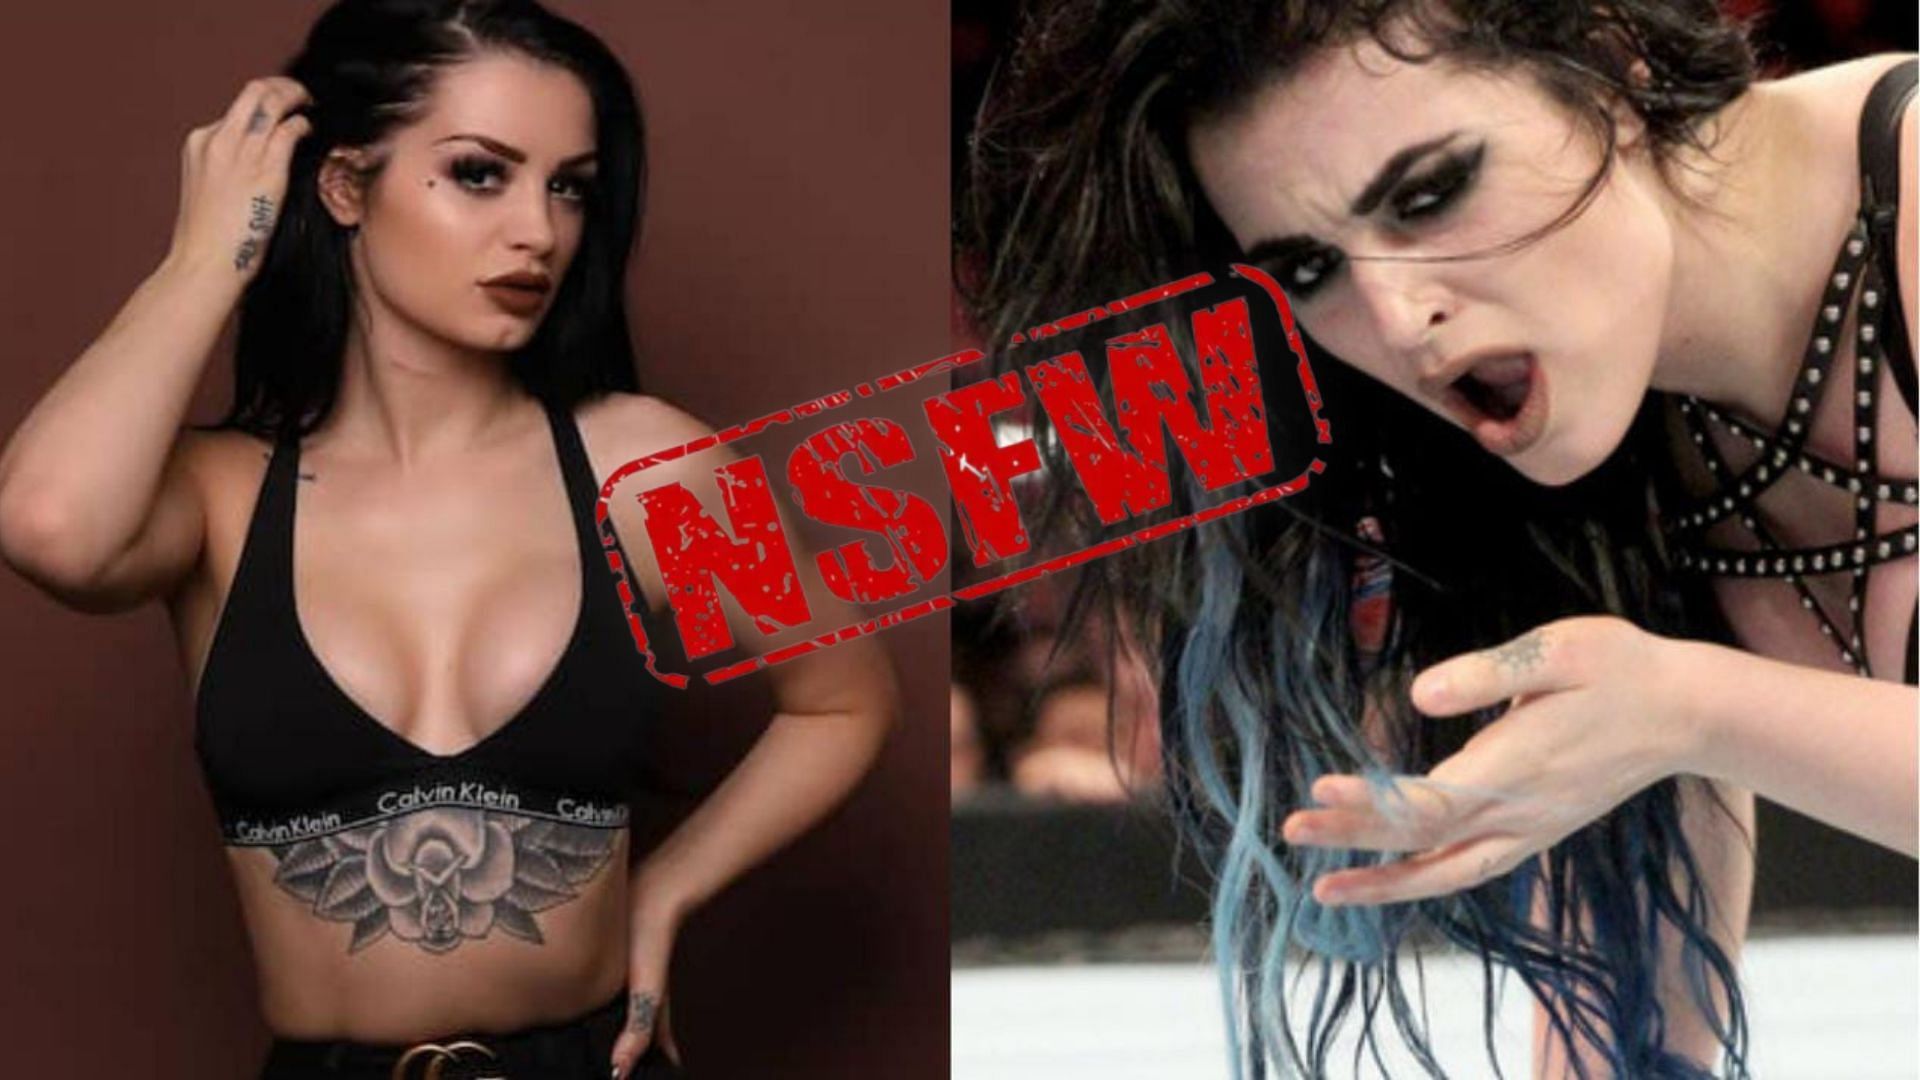 Saraya recently revealed a big detail about her past